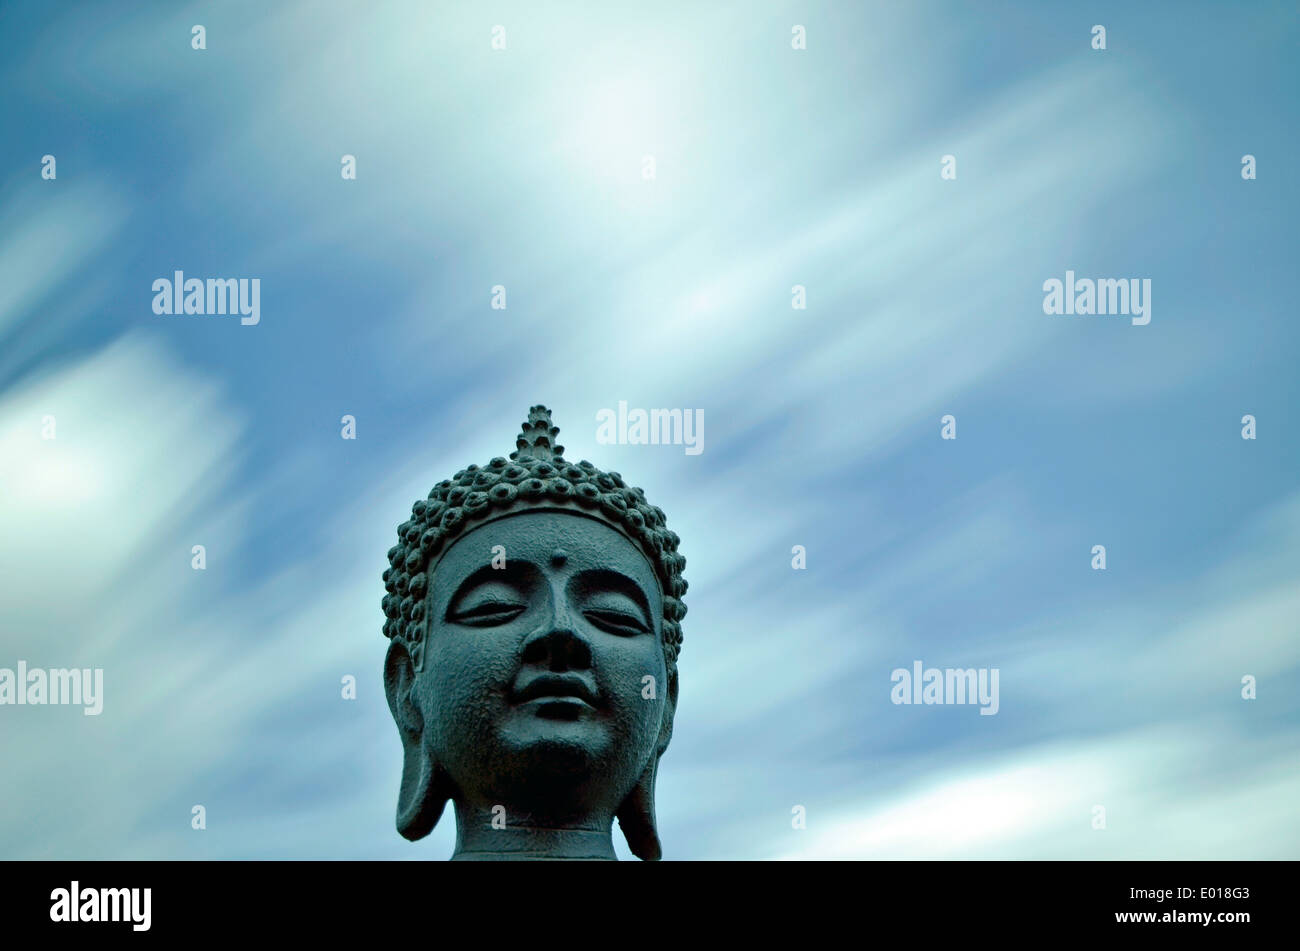 Buddha, photographed through an ND filter to give movement to the sky. Stock Photo